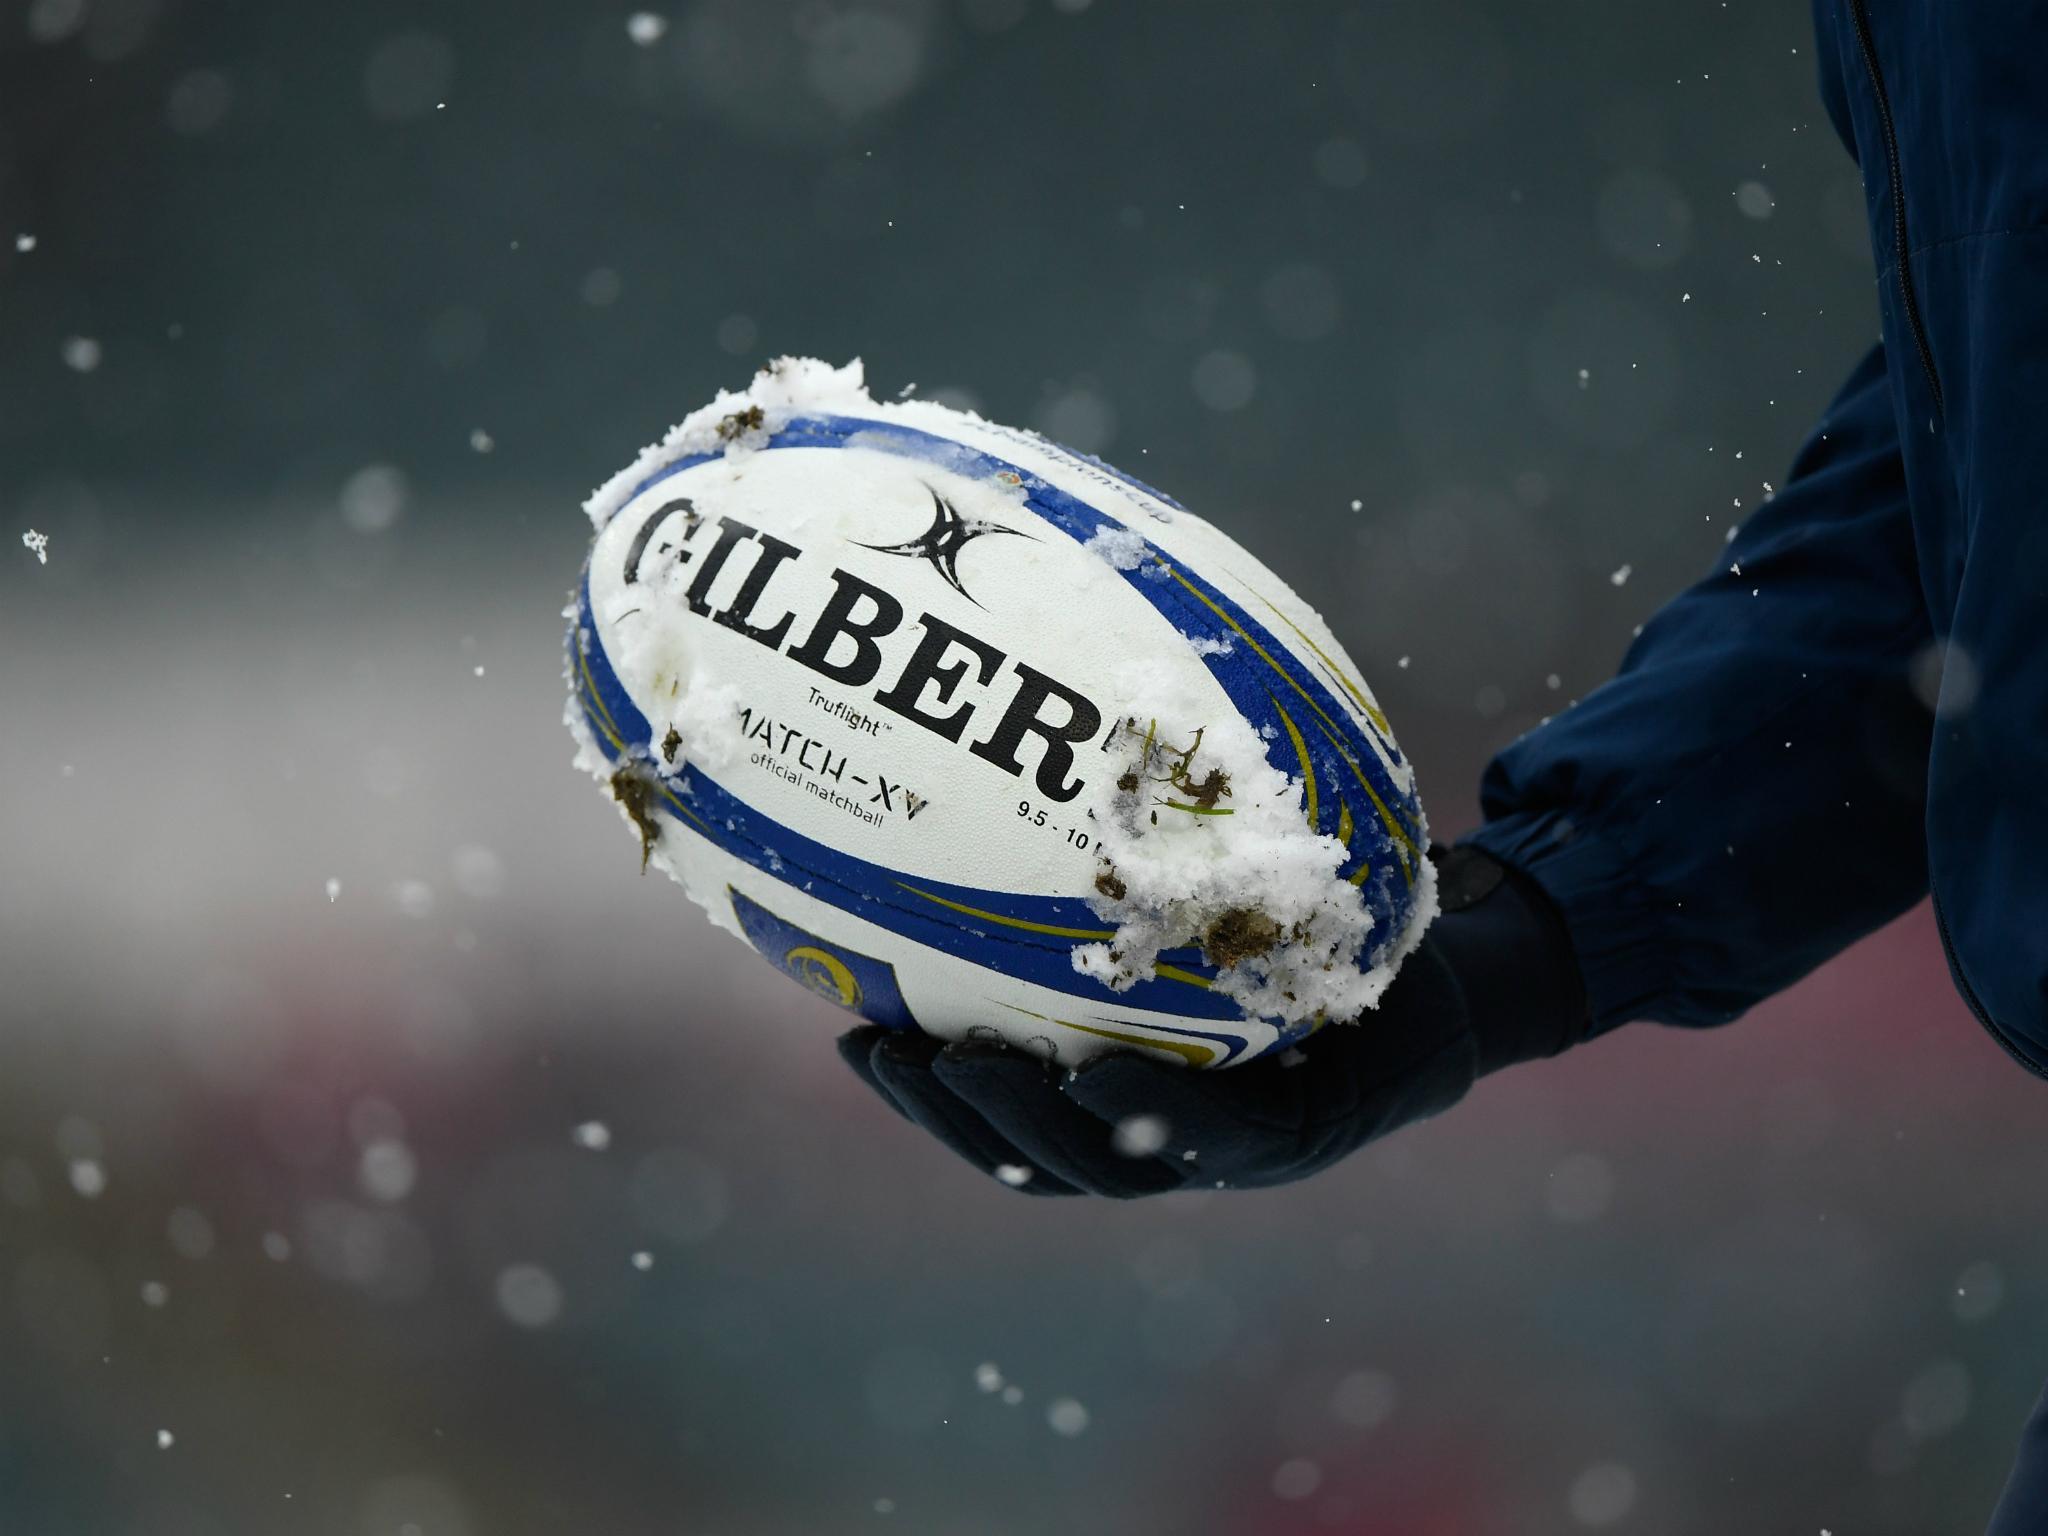 Two matches have already been postponed until Sunday in the Premiership this weekend